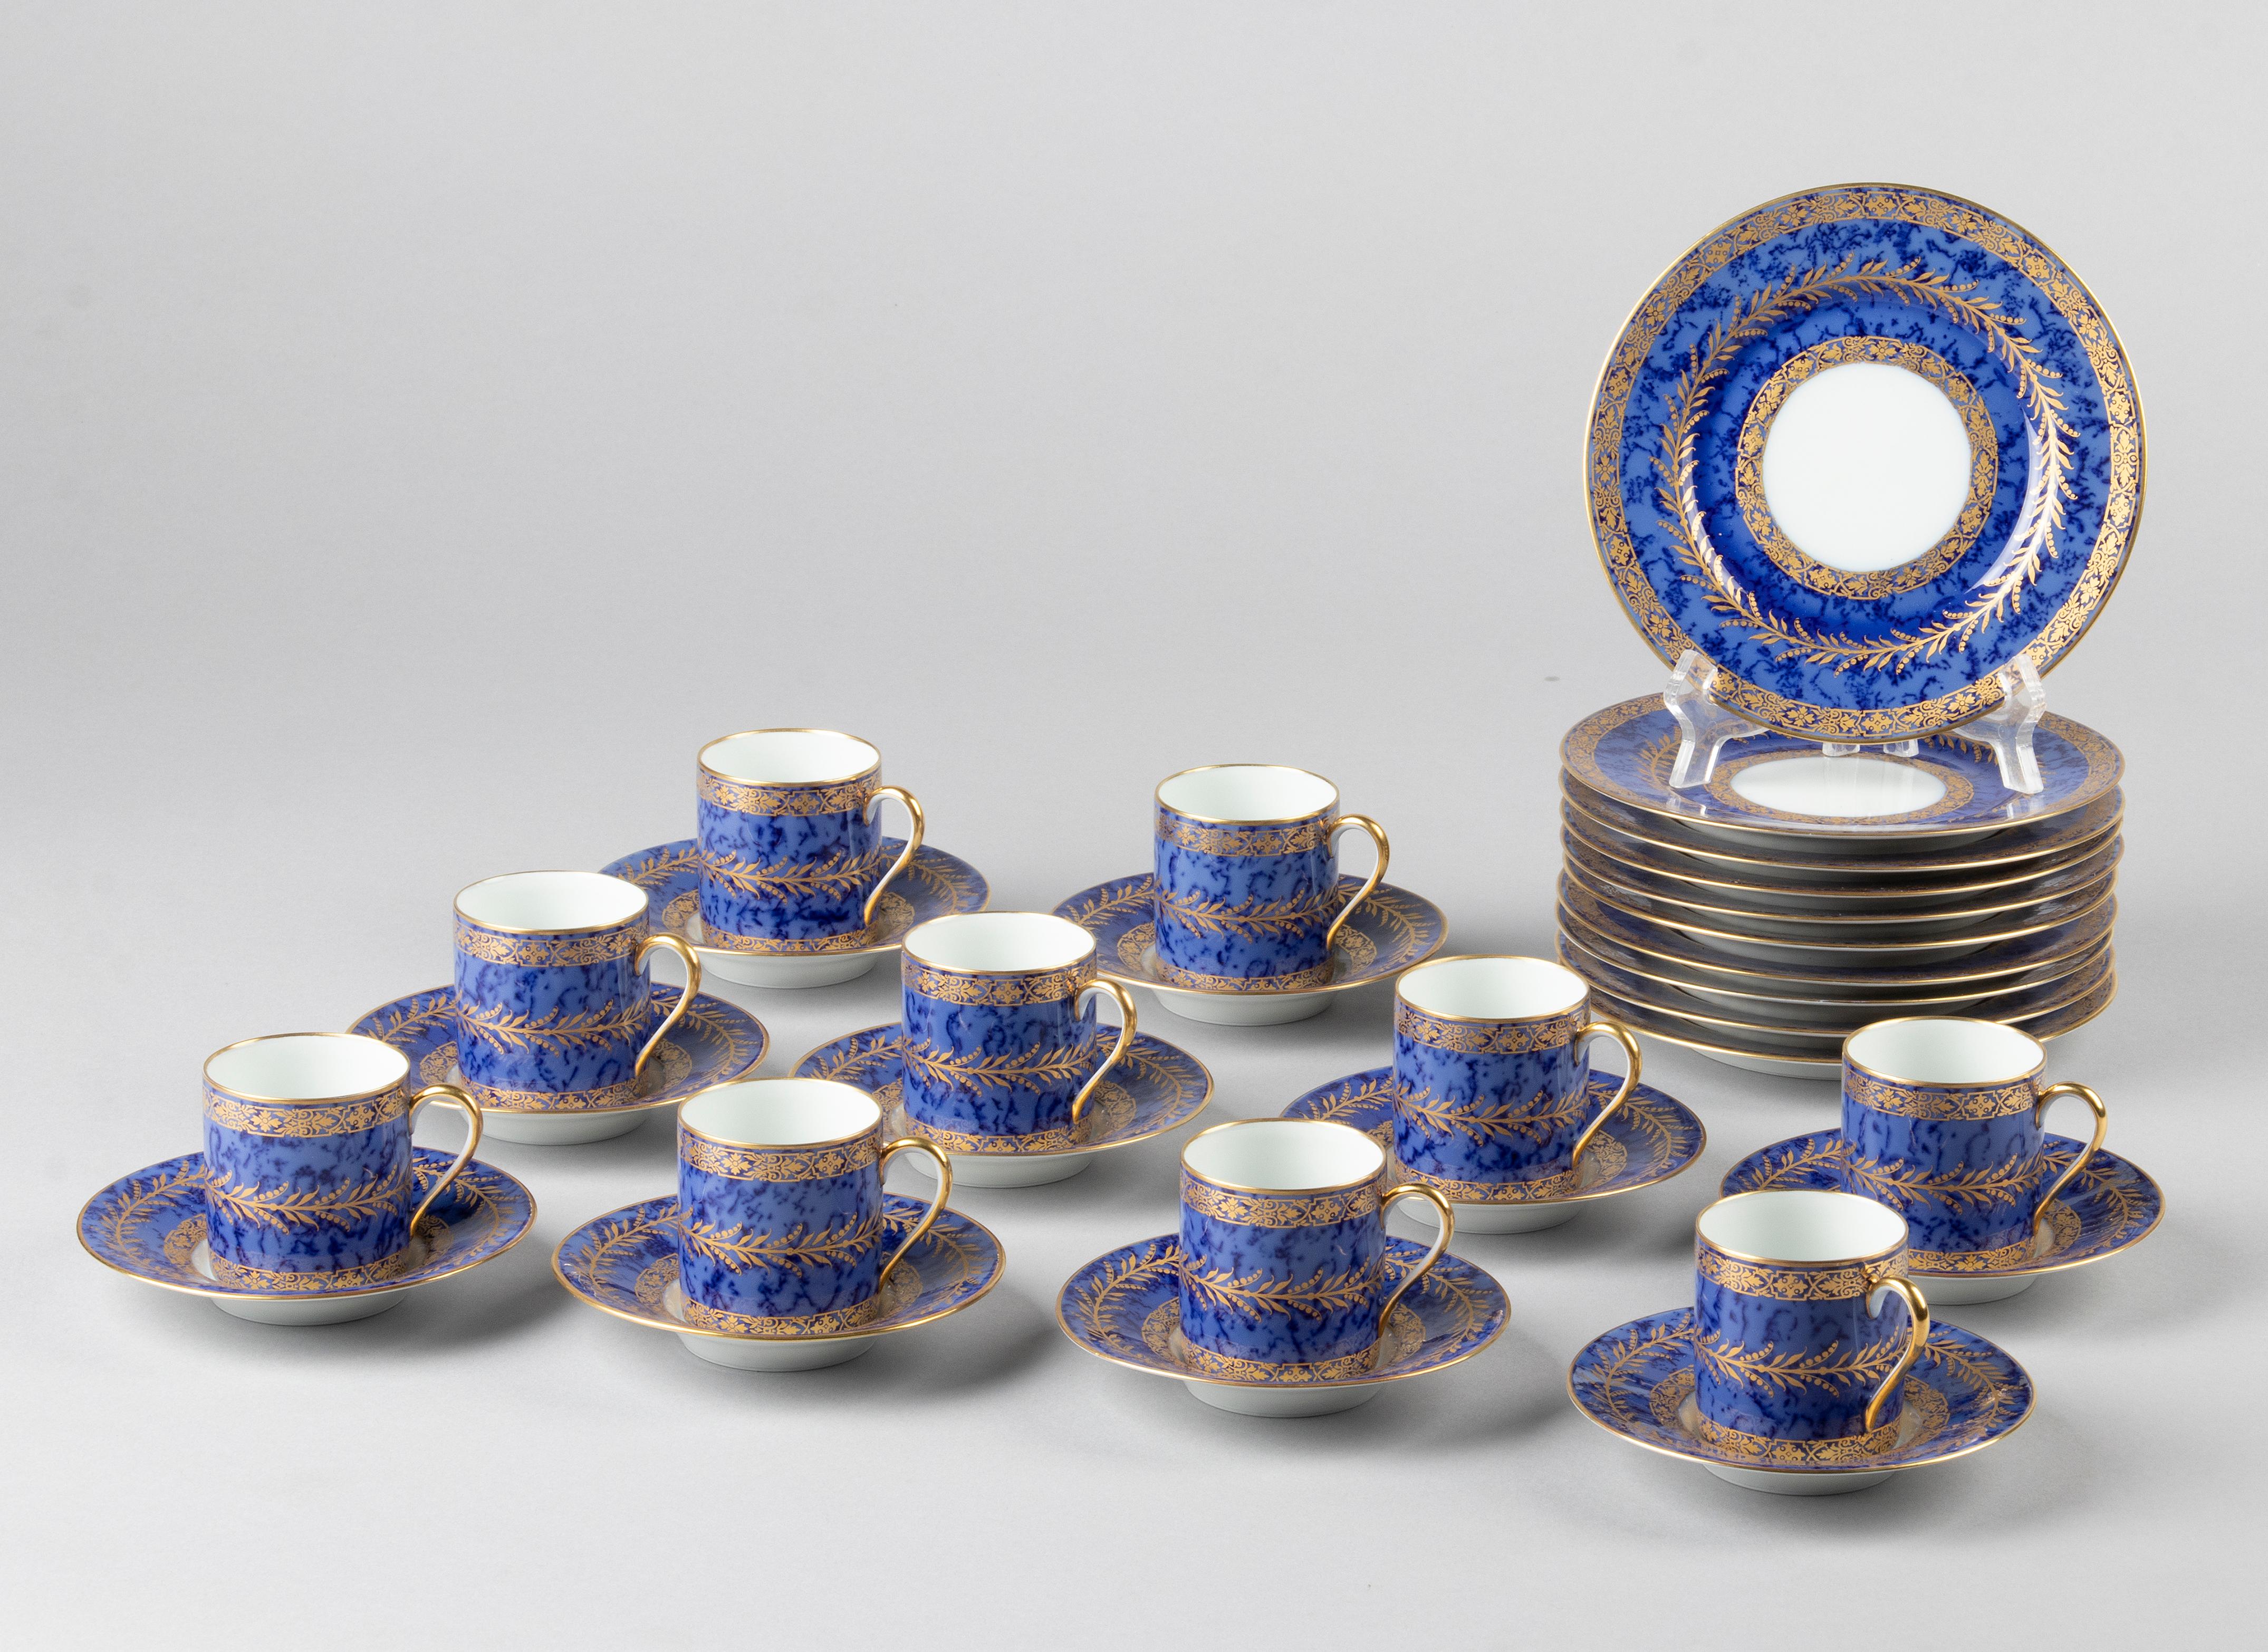 Great set of porcelain coffee and pastry service from the French brand Raynaud Limoges. The service has a beautiful deep blue color, with a bit of a cloudy pattern and beautiful gold accents. The service dates from around 1970-1980. All parts are